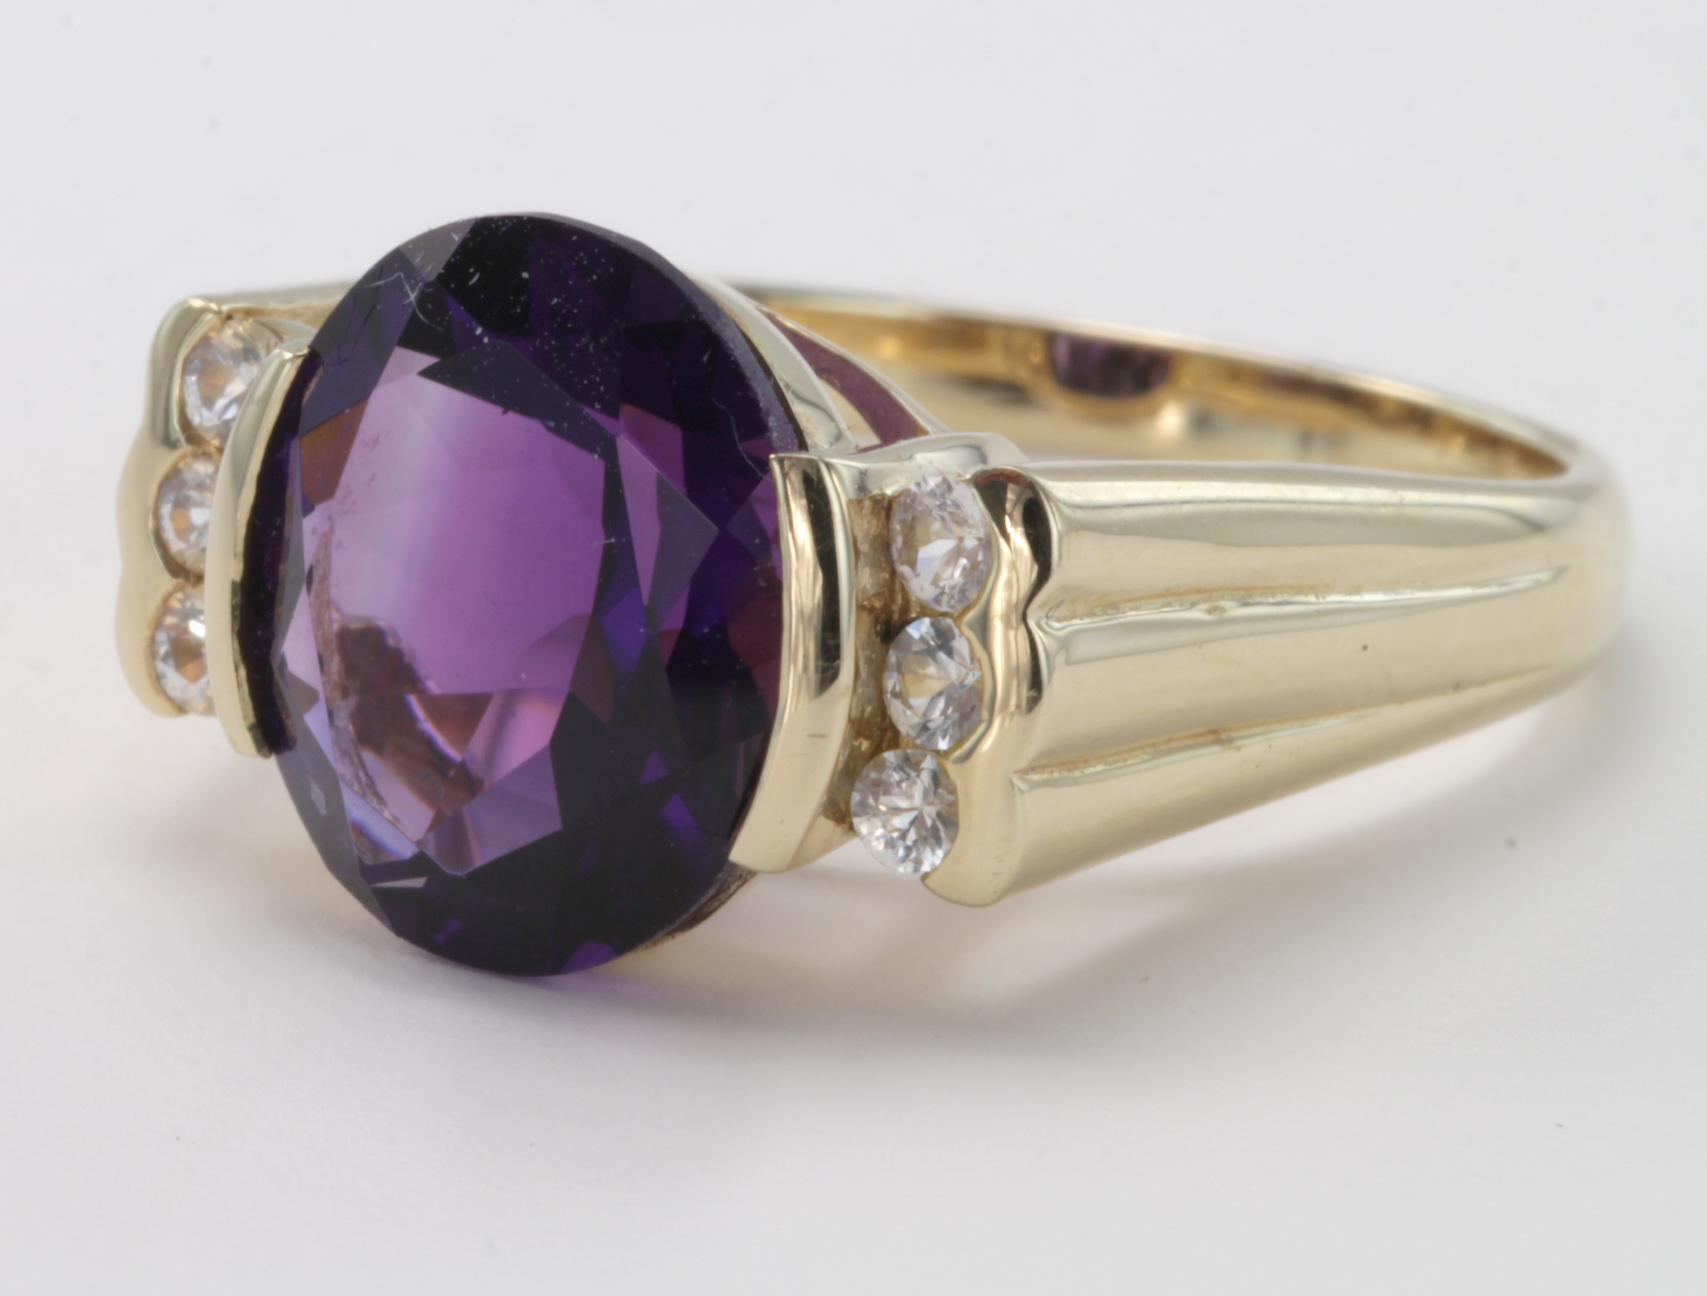 9ct Gold Amethyst/CZ Ring size N weight 4.5g